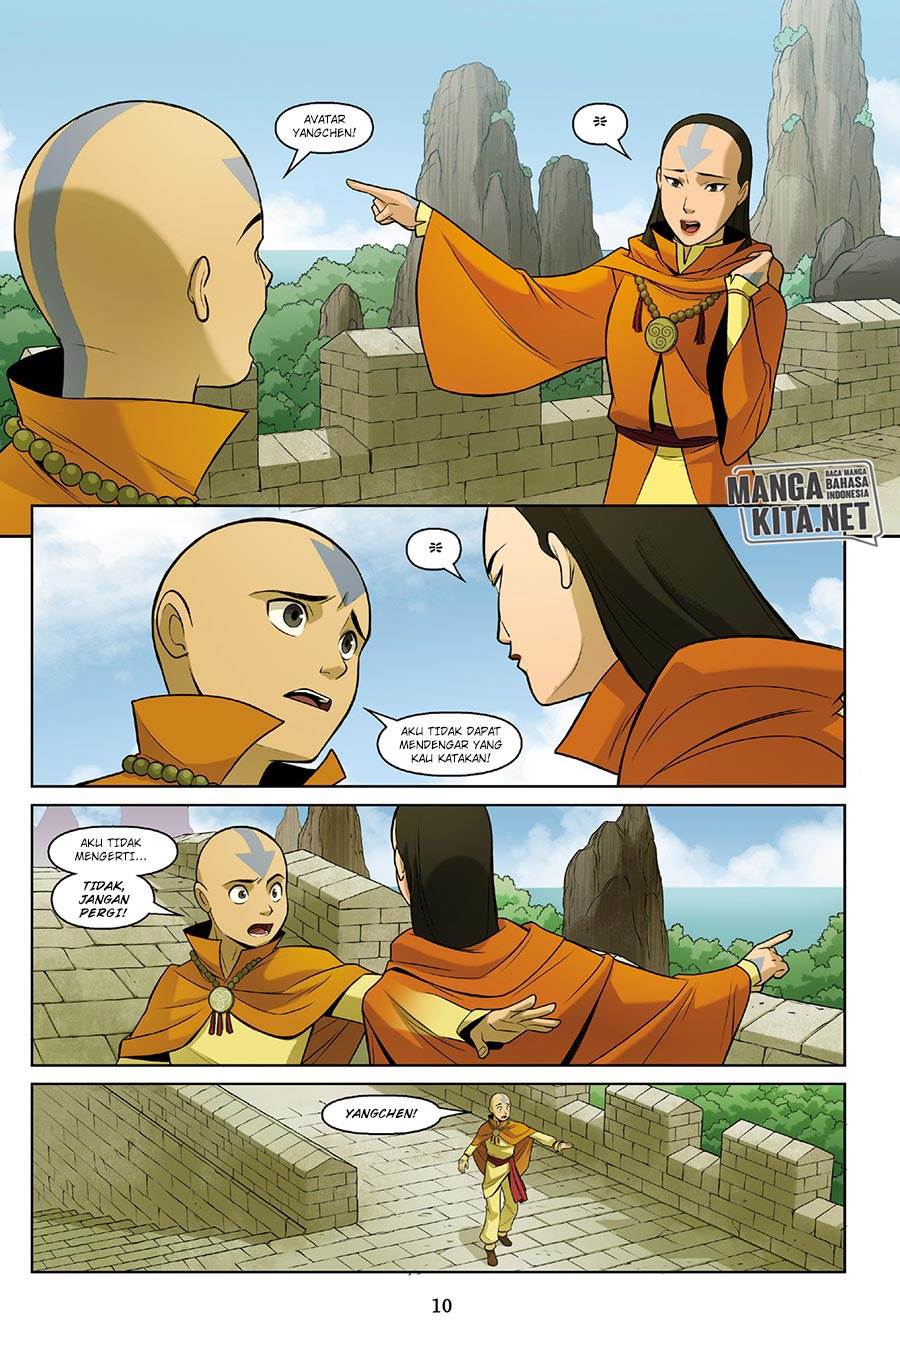 Avatar: The Last Airbender – The Rift Chapter 1.1